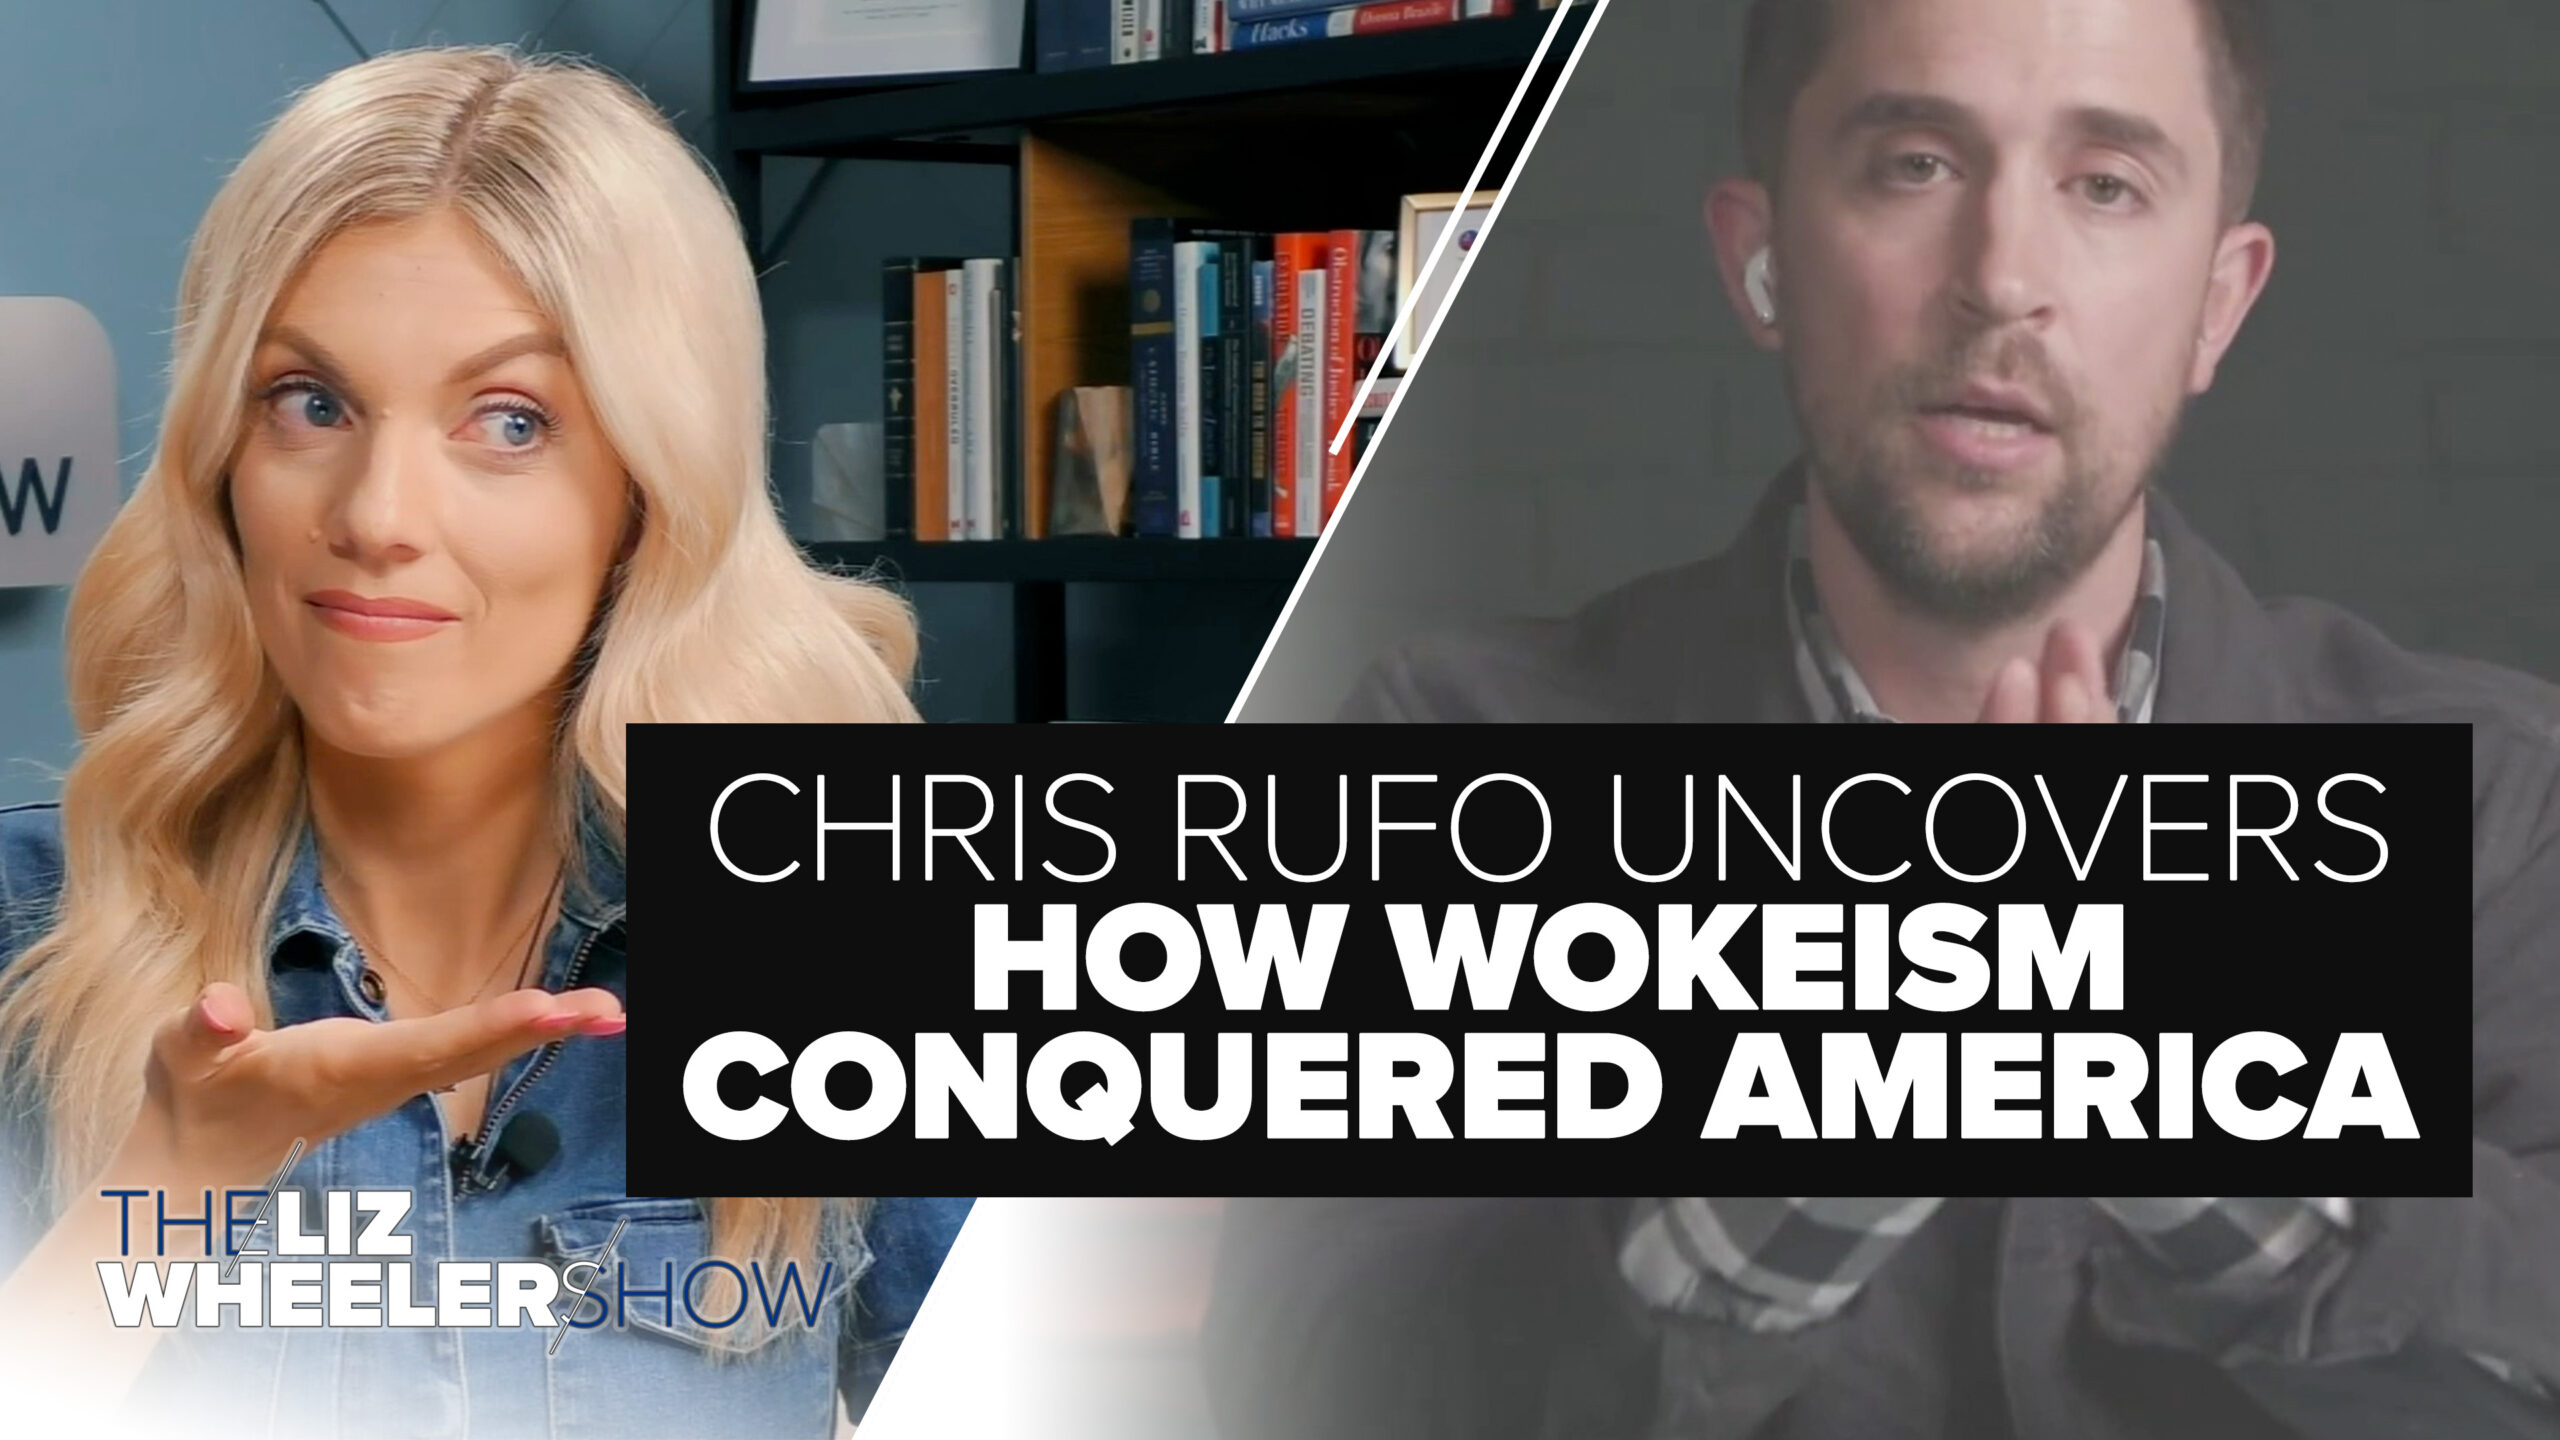 Chris Rufo talks about his new book, "America's Cultural Revolution: How the Radical Left Conquered Everything"